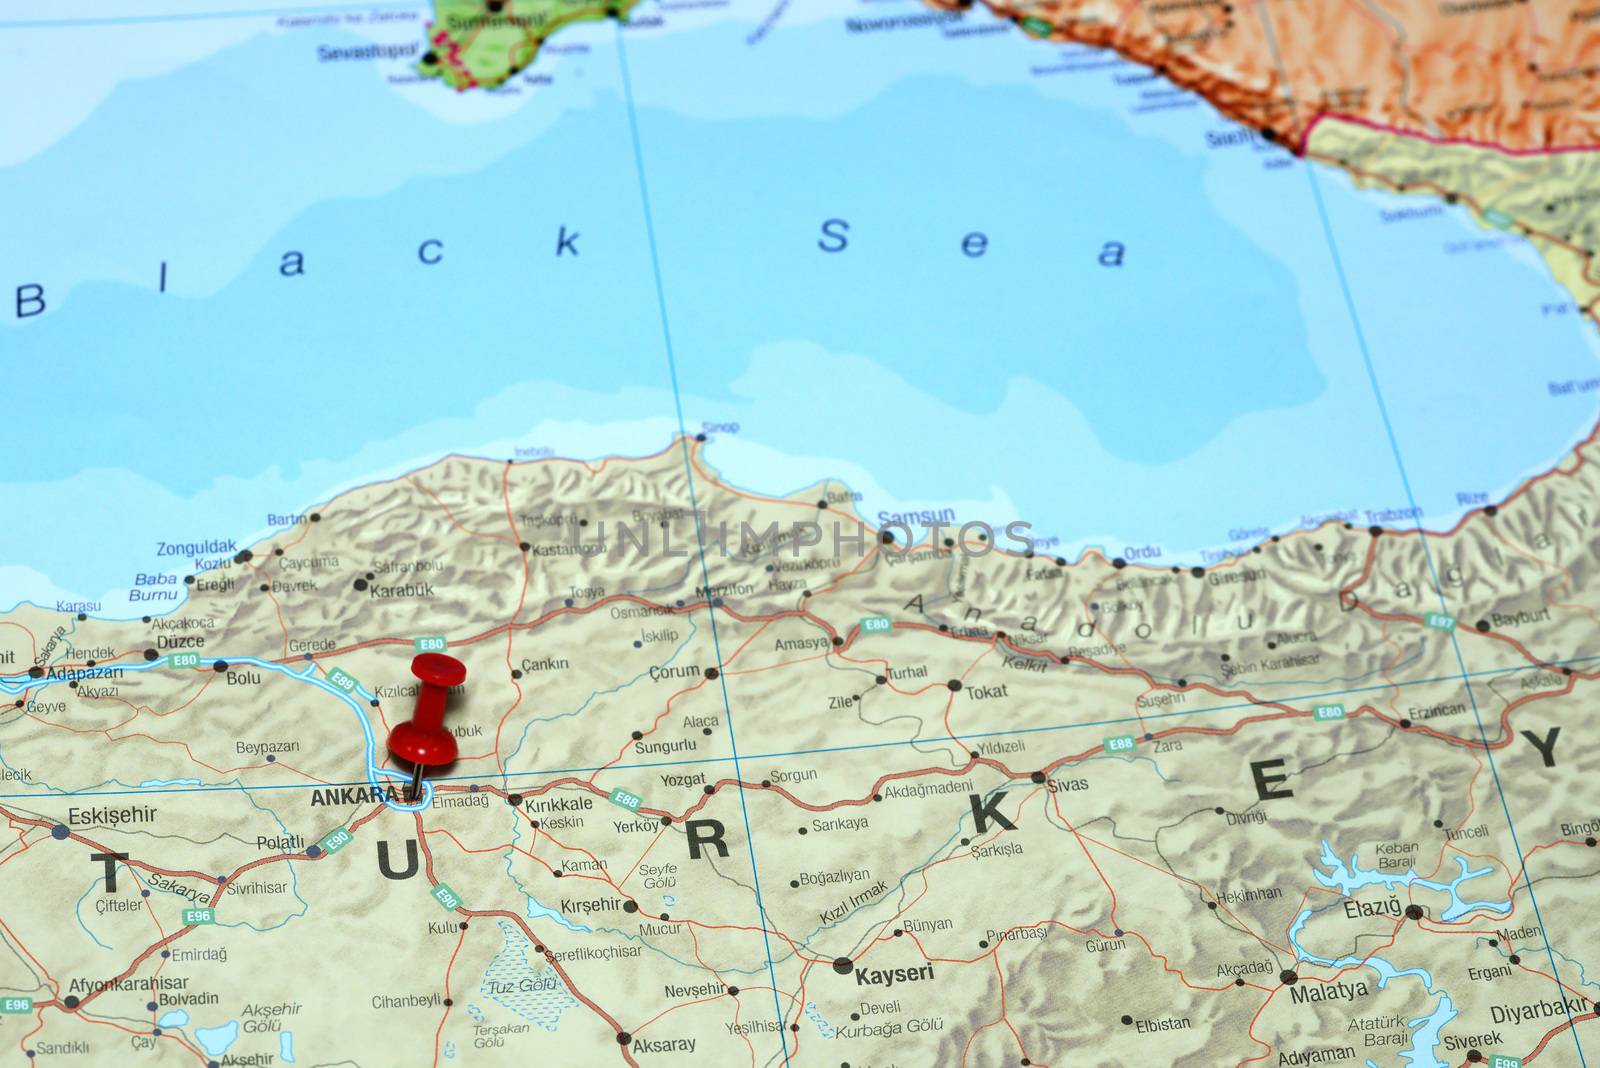 Ankara pinned on a map of europe by dk_photos